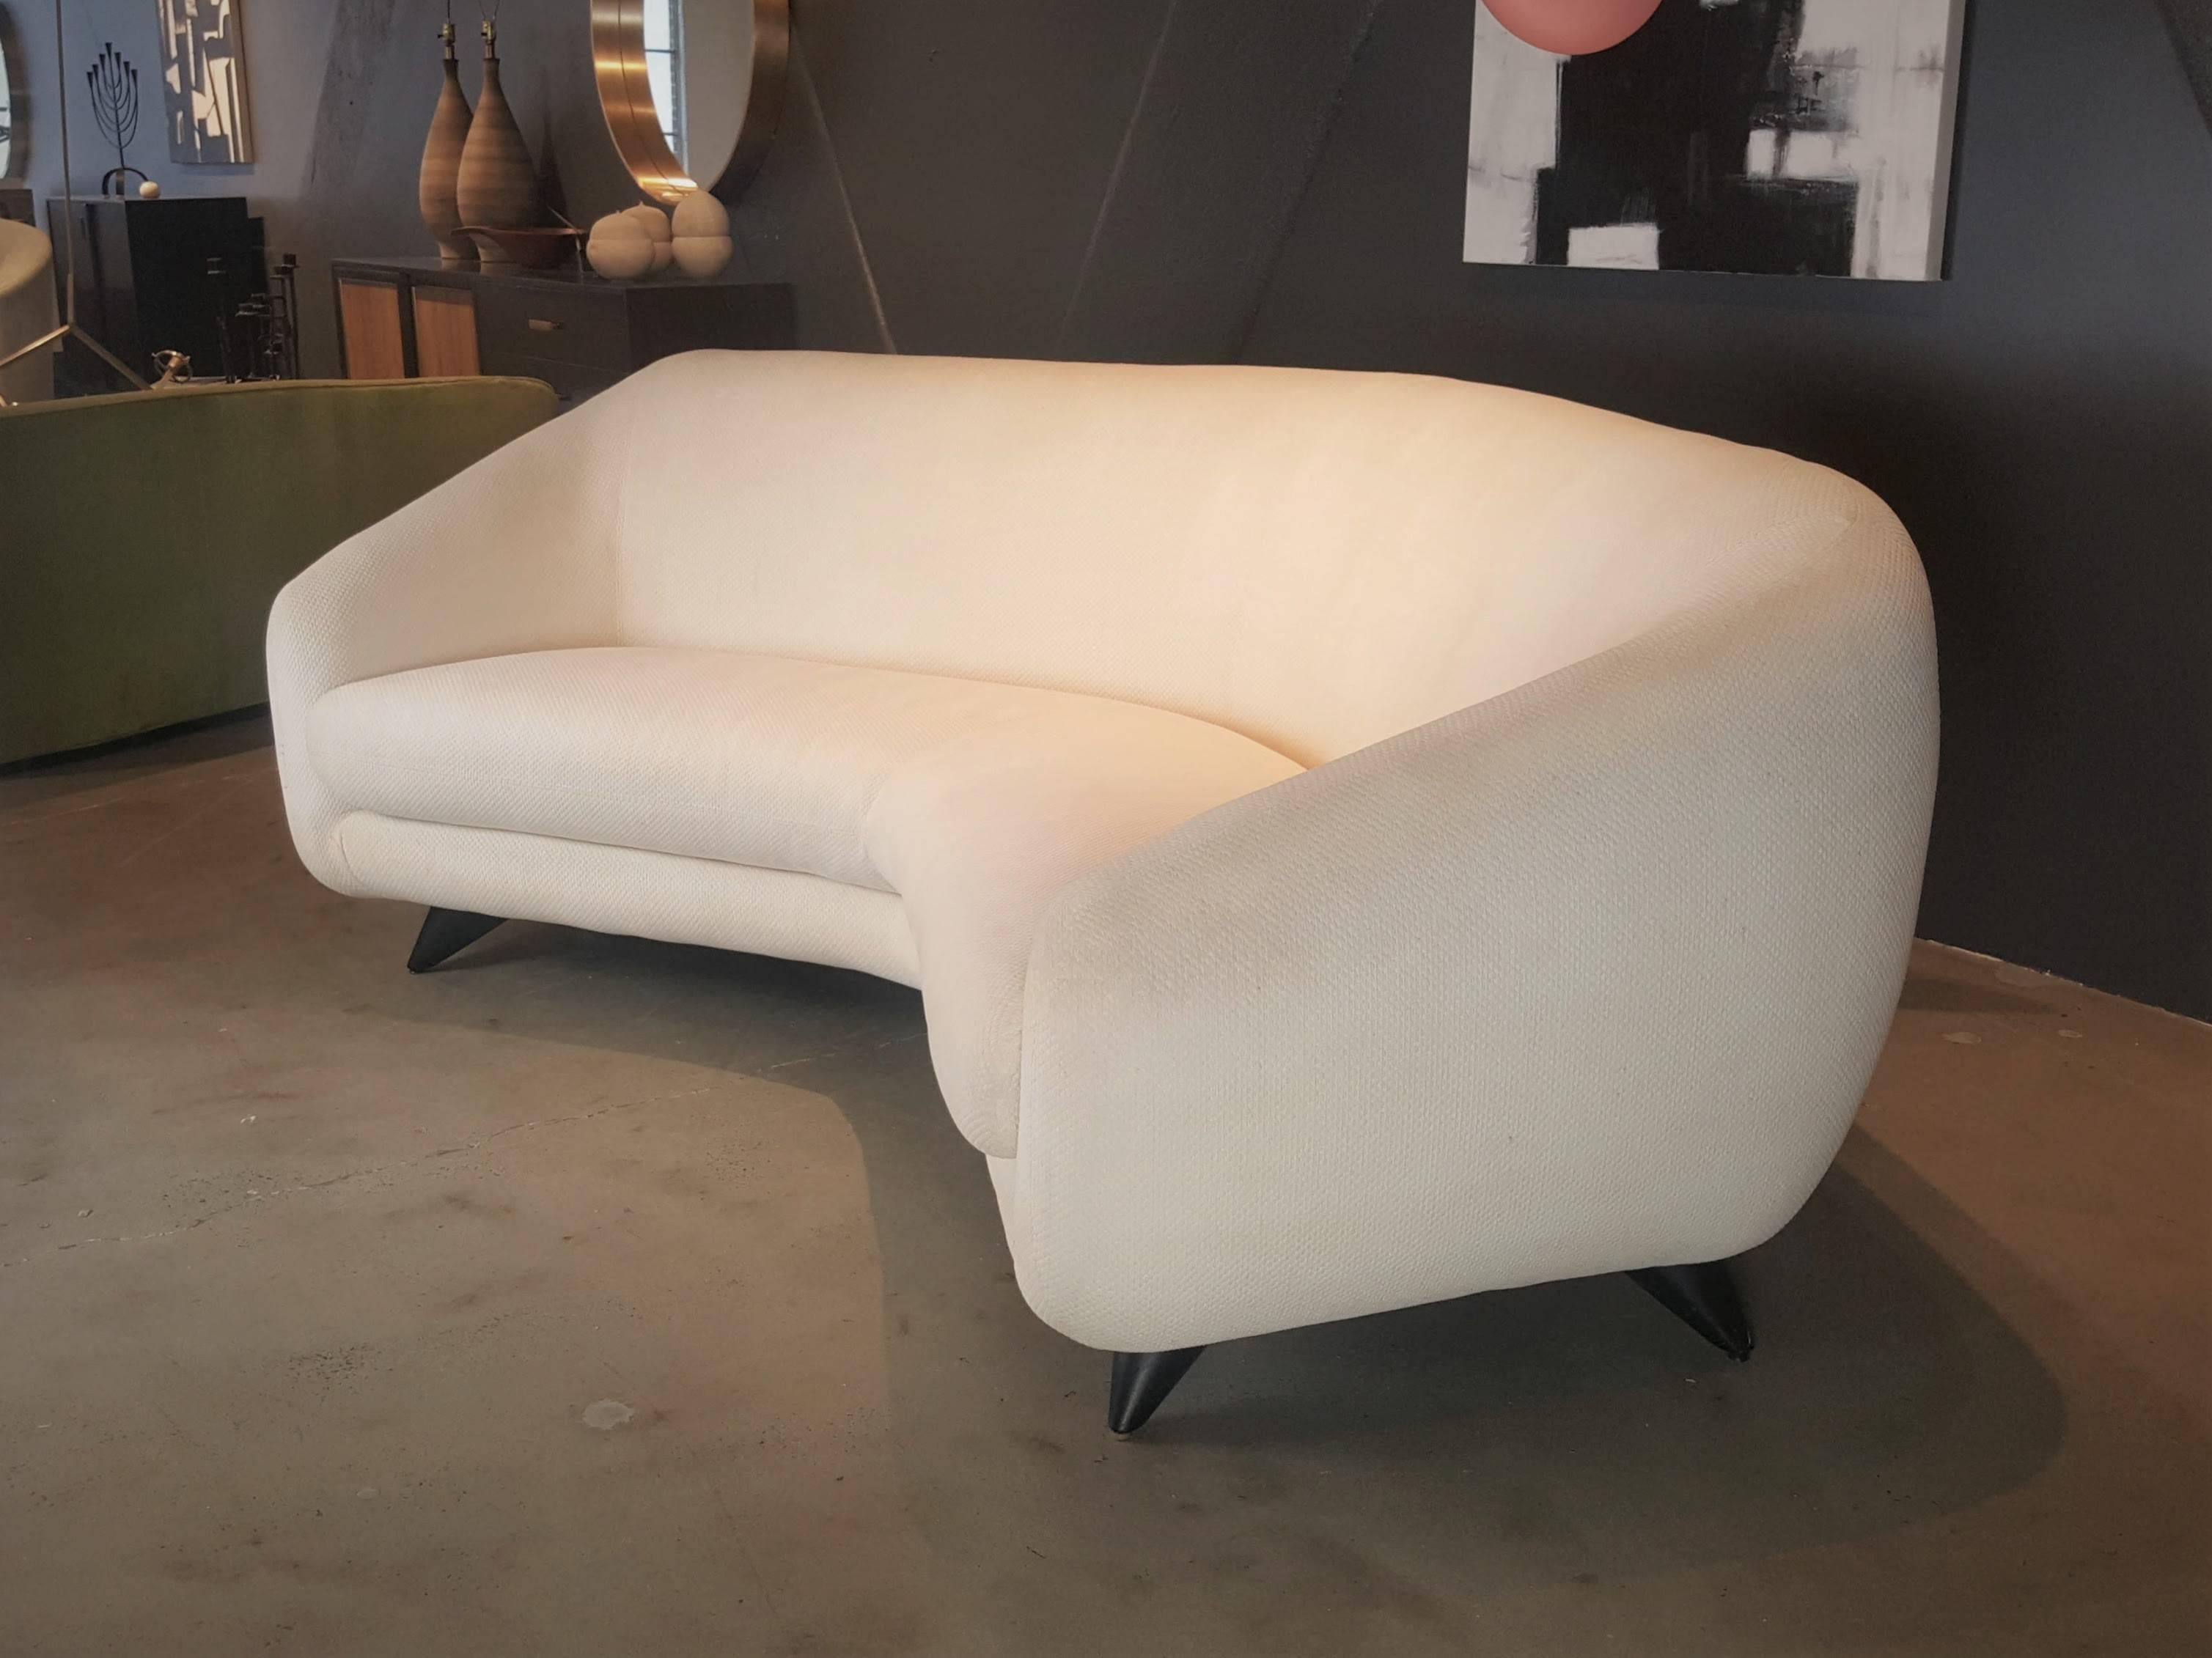 Extremely rare "Tangent" sofa by Vladimir Kagan for Weiman's preview furniture line. This sofa is outrageously comfortable and inviting, yet sleek and sculptural, it is always so difficult to find the perfect marriage of comfort and beauty